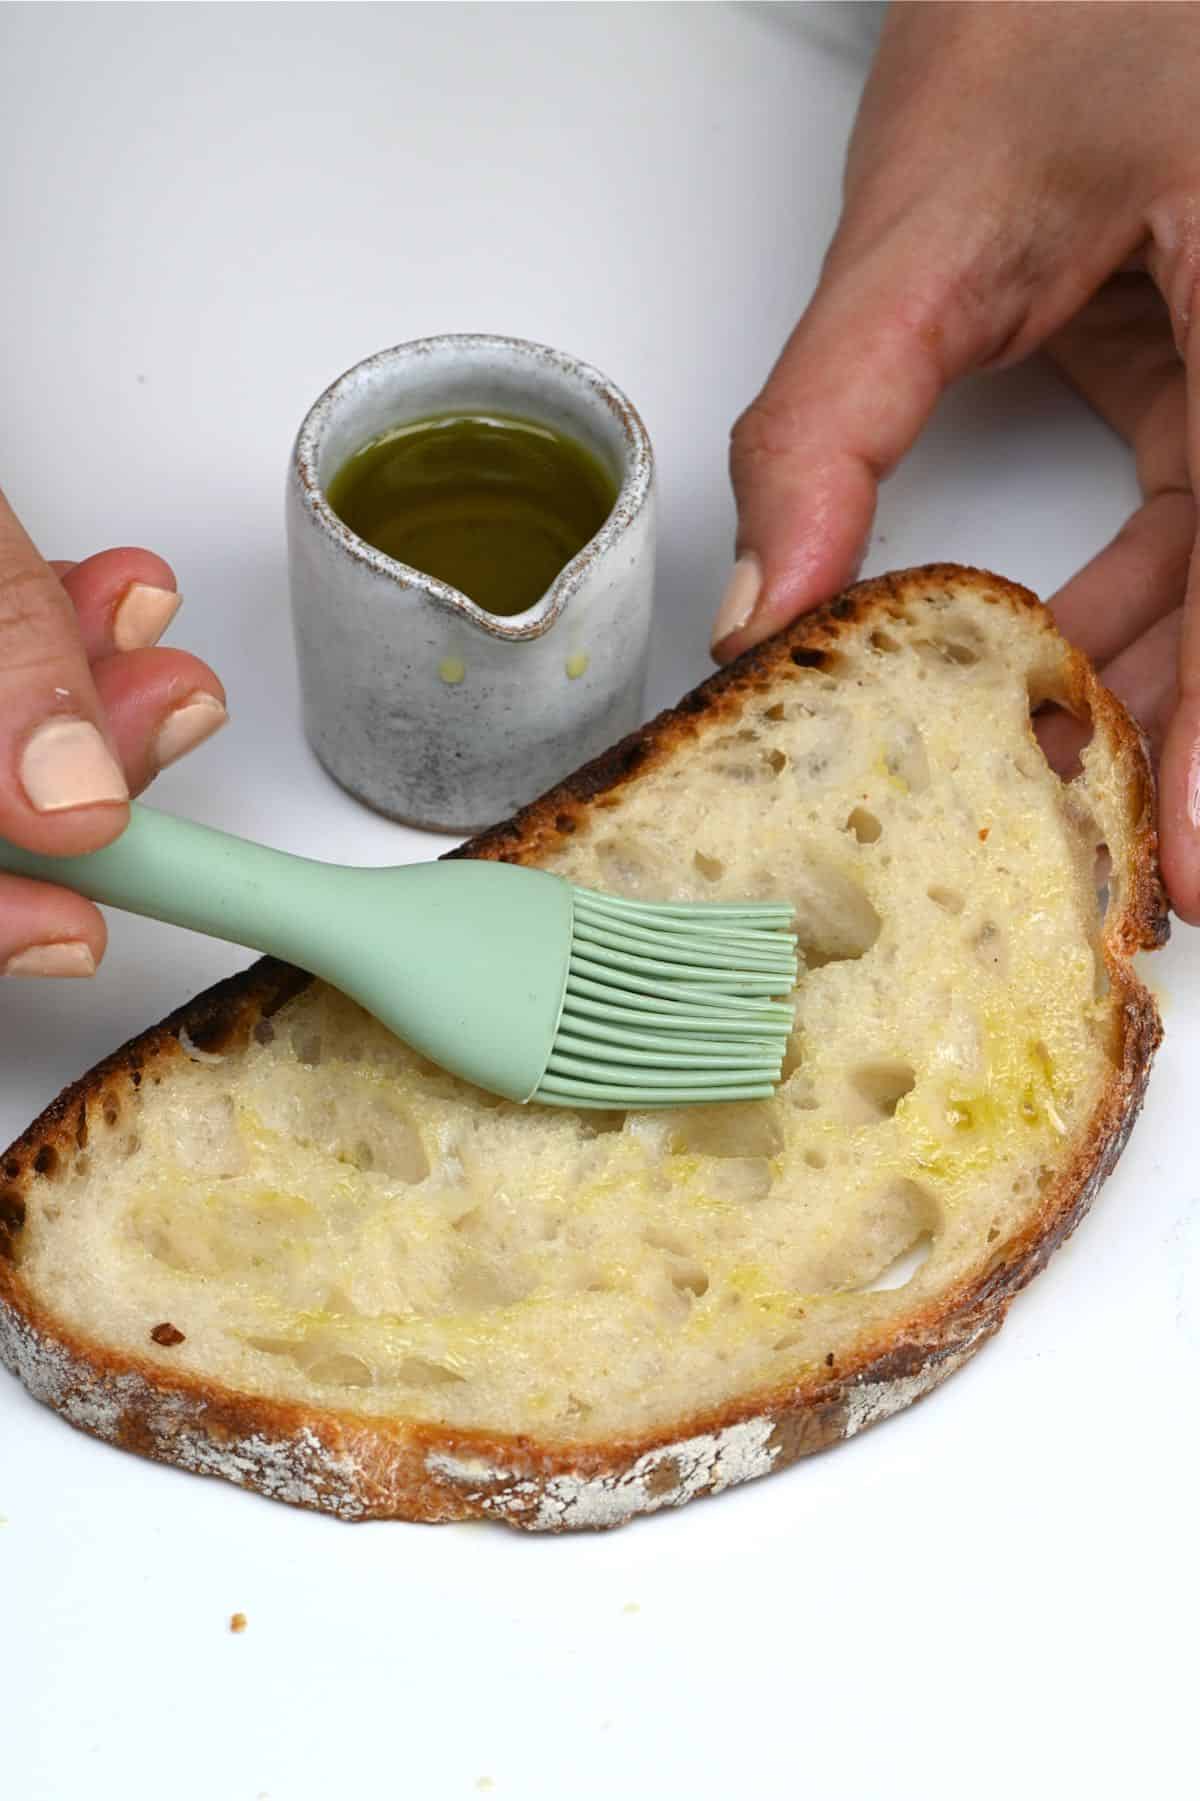 Brushing a slice of bread with oil